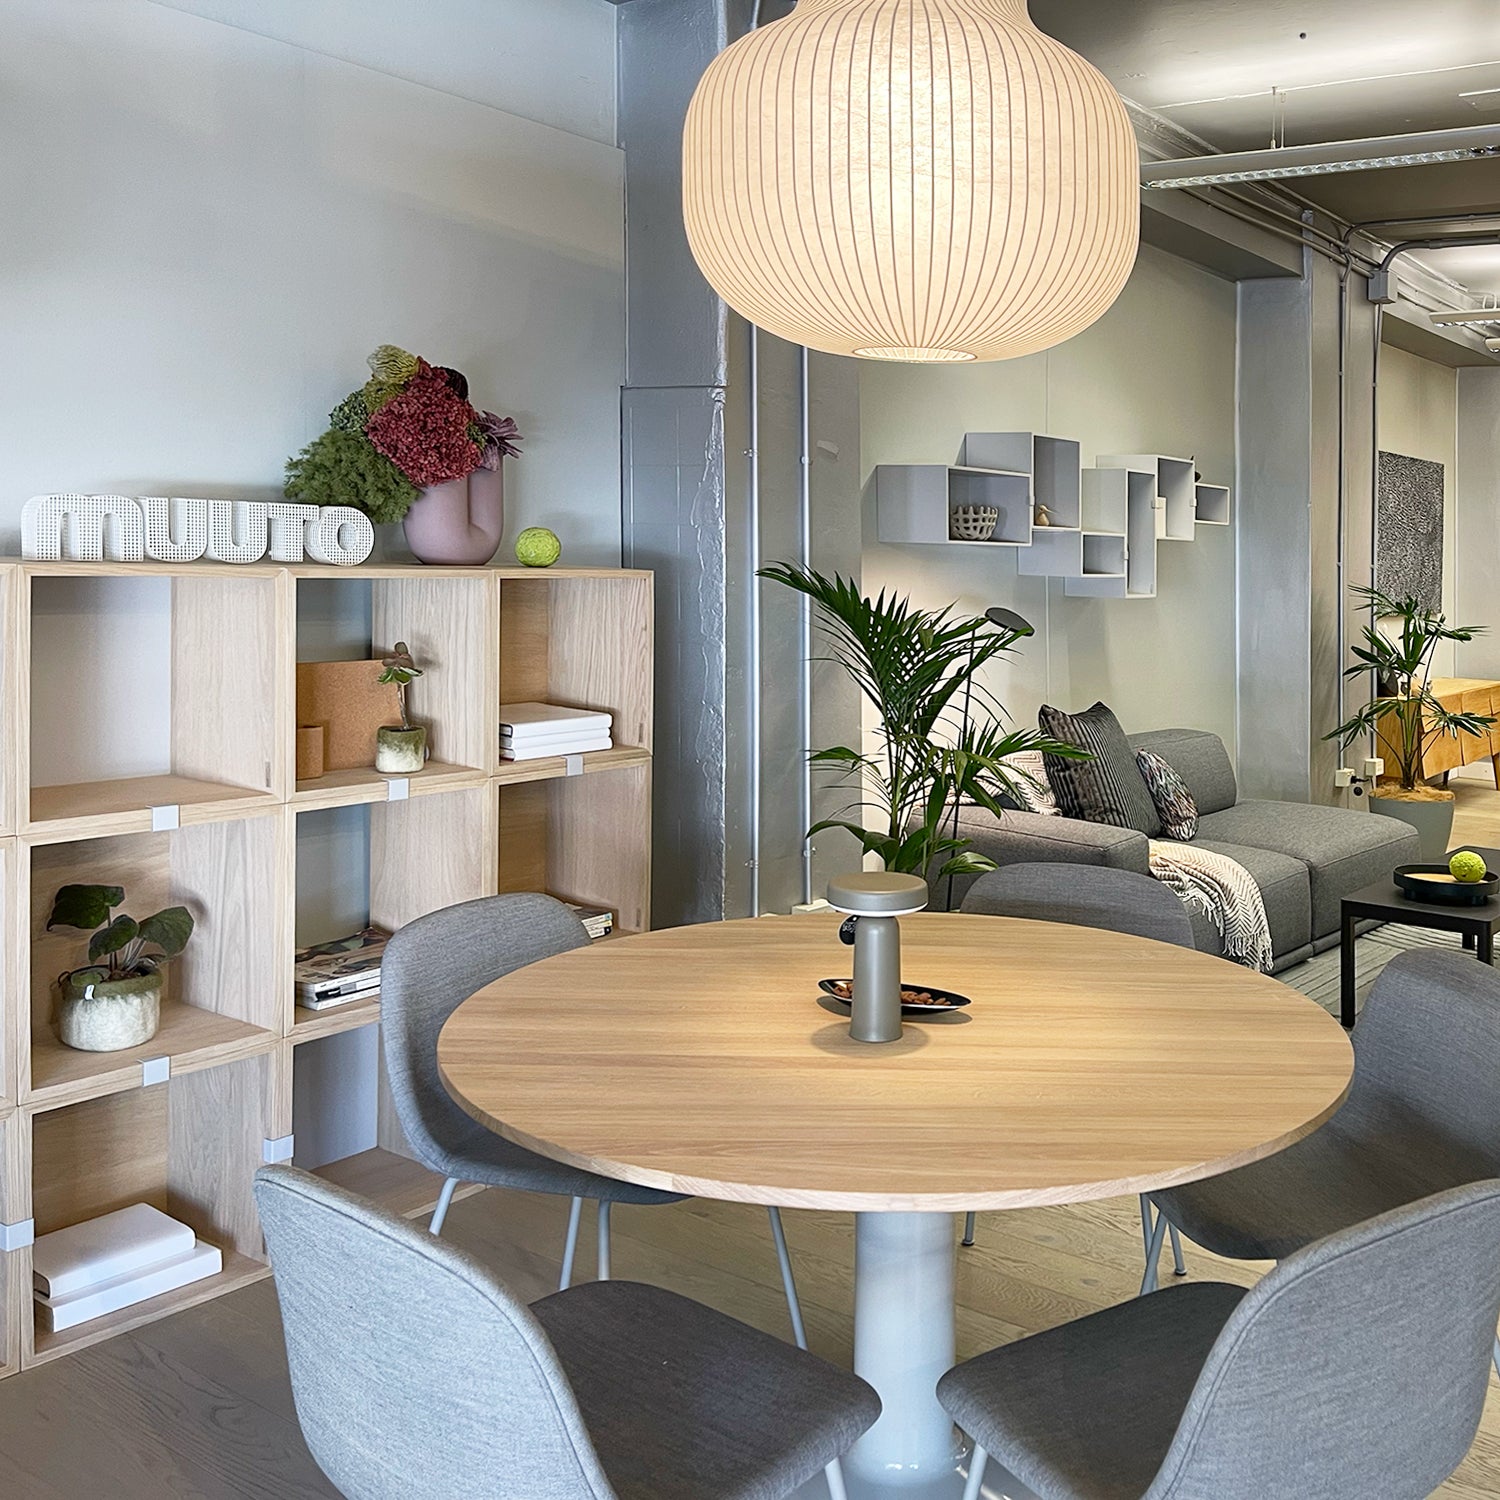 muuto_experience_space_stacked_shelving_midst_dining_1500.jpg__PID:6640210e-4898-4689-8d94-82a33405082a